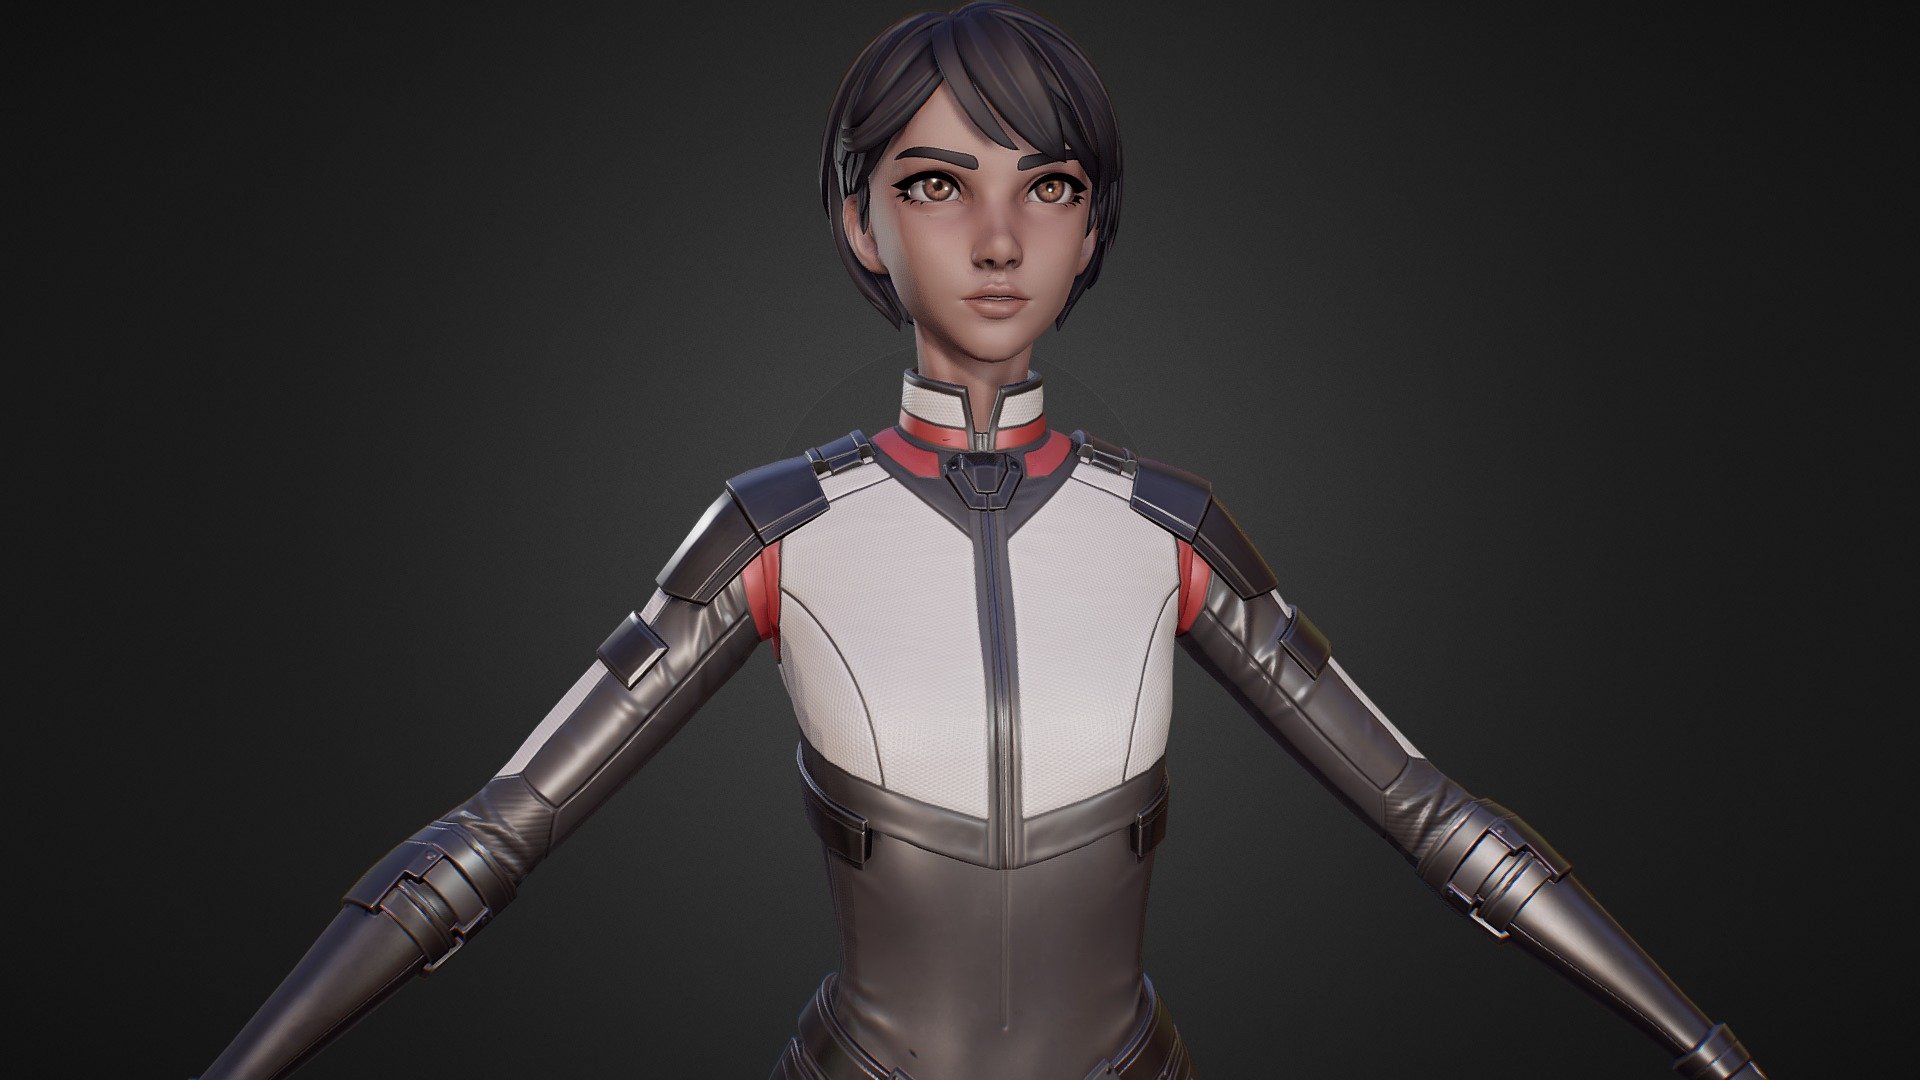 Game-ready scifi character, made with blender + substance painter.




52 ARKit facial blendshapes;

Includes .UnityPackage with unity specific texture maps and samples for Builtin pipeline, HDRP and URP;

unity package also contains 2 extra outfits (underwear and casual)

Animation tests recorded in unity:
https://www.youtube.com/watch?v=wf4Ulm5Iaz0 - Aliya - Game Ready Character - Buy Royalty Free 3D model by Rukha93 3d model